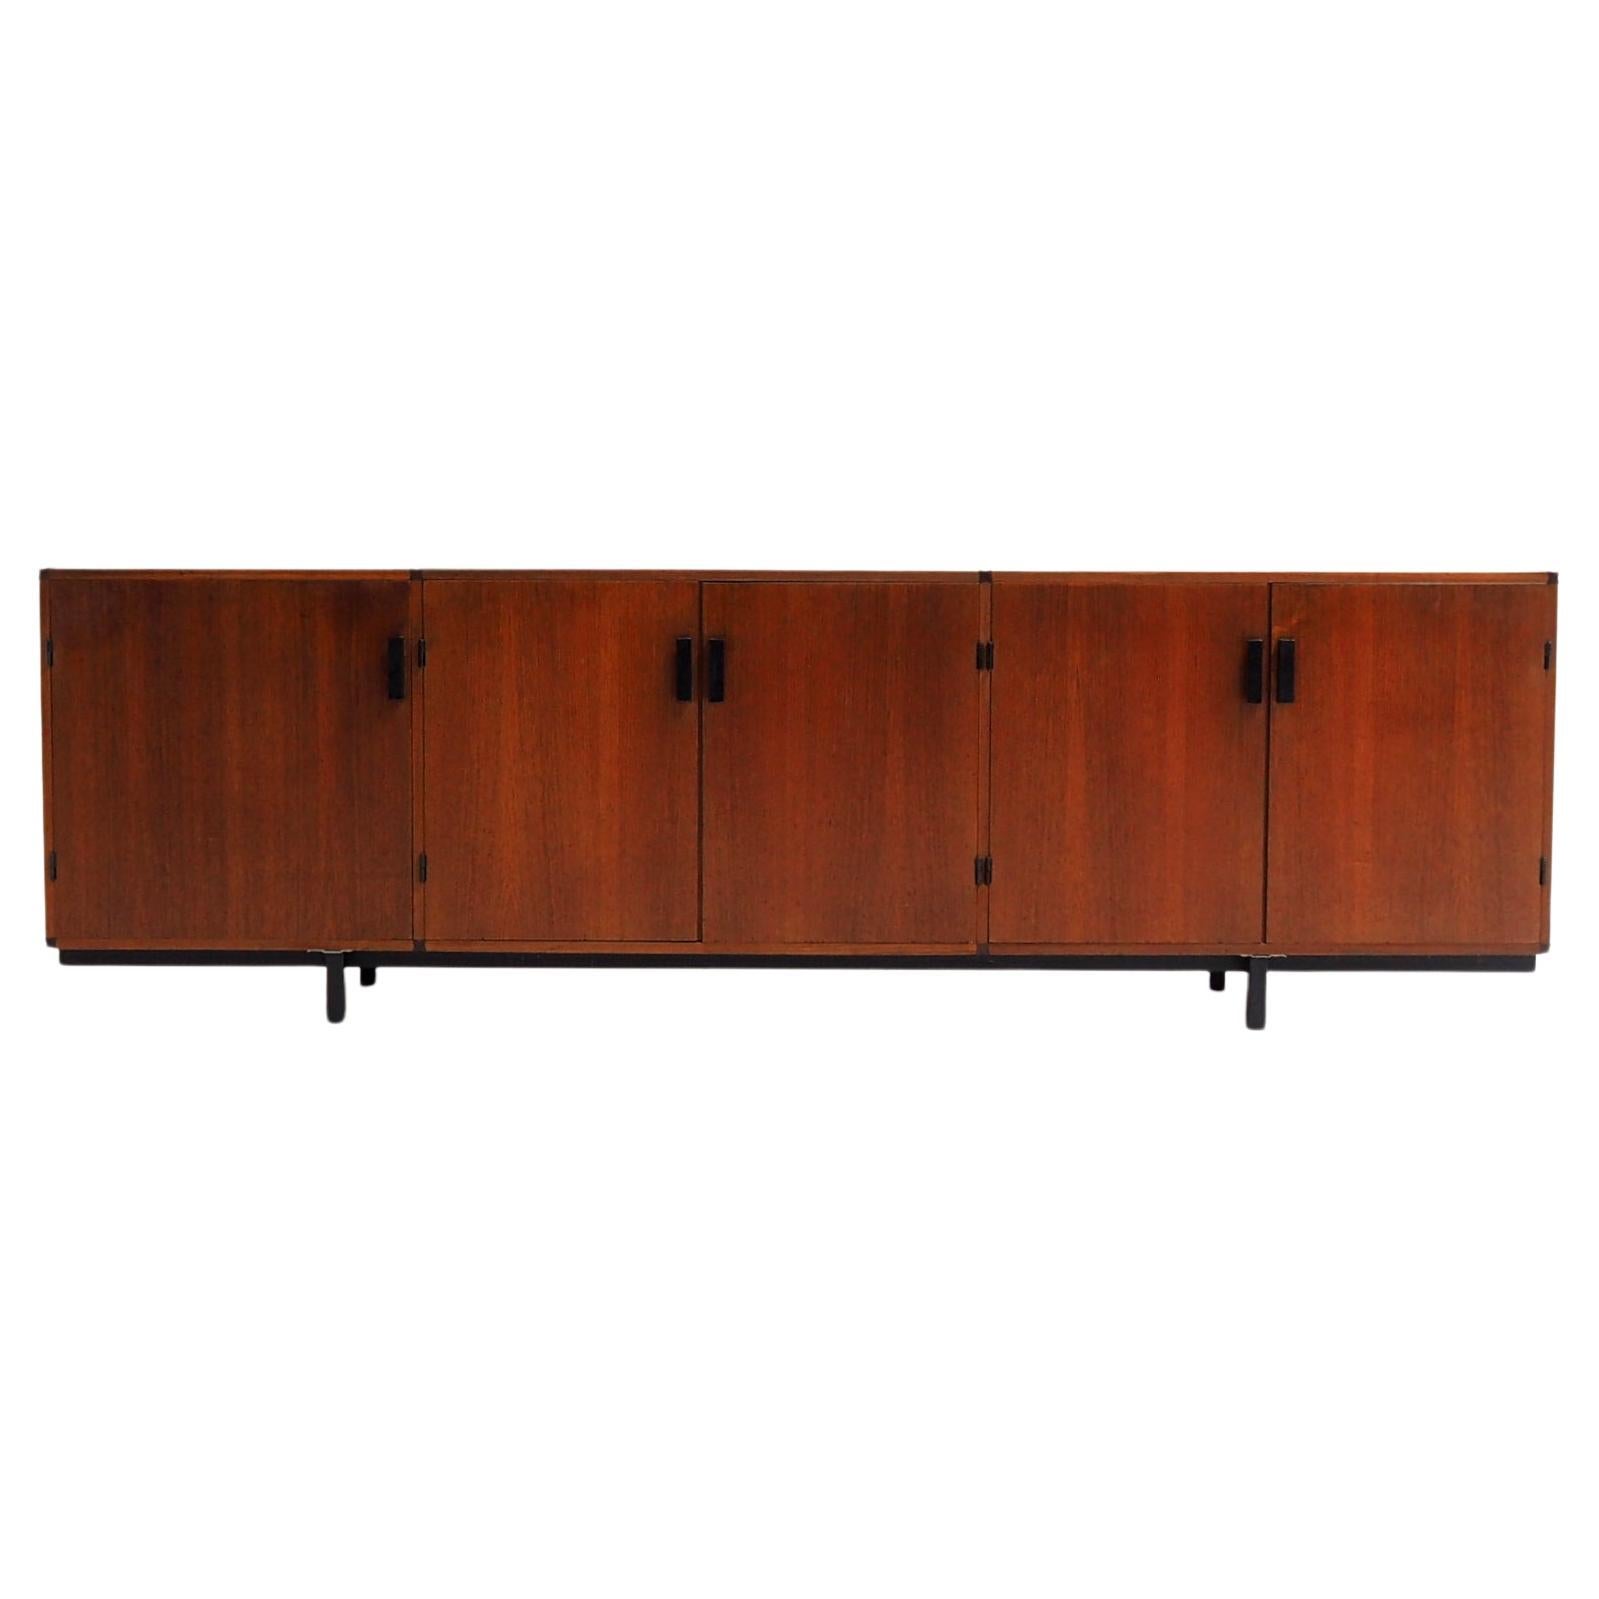 1960s ‘Made to Measure’ sideboard by Cees Braakman for Pastoe